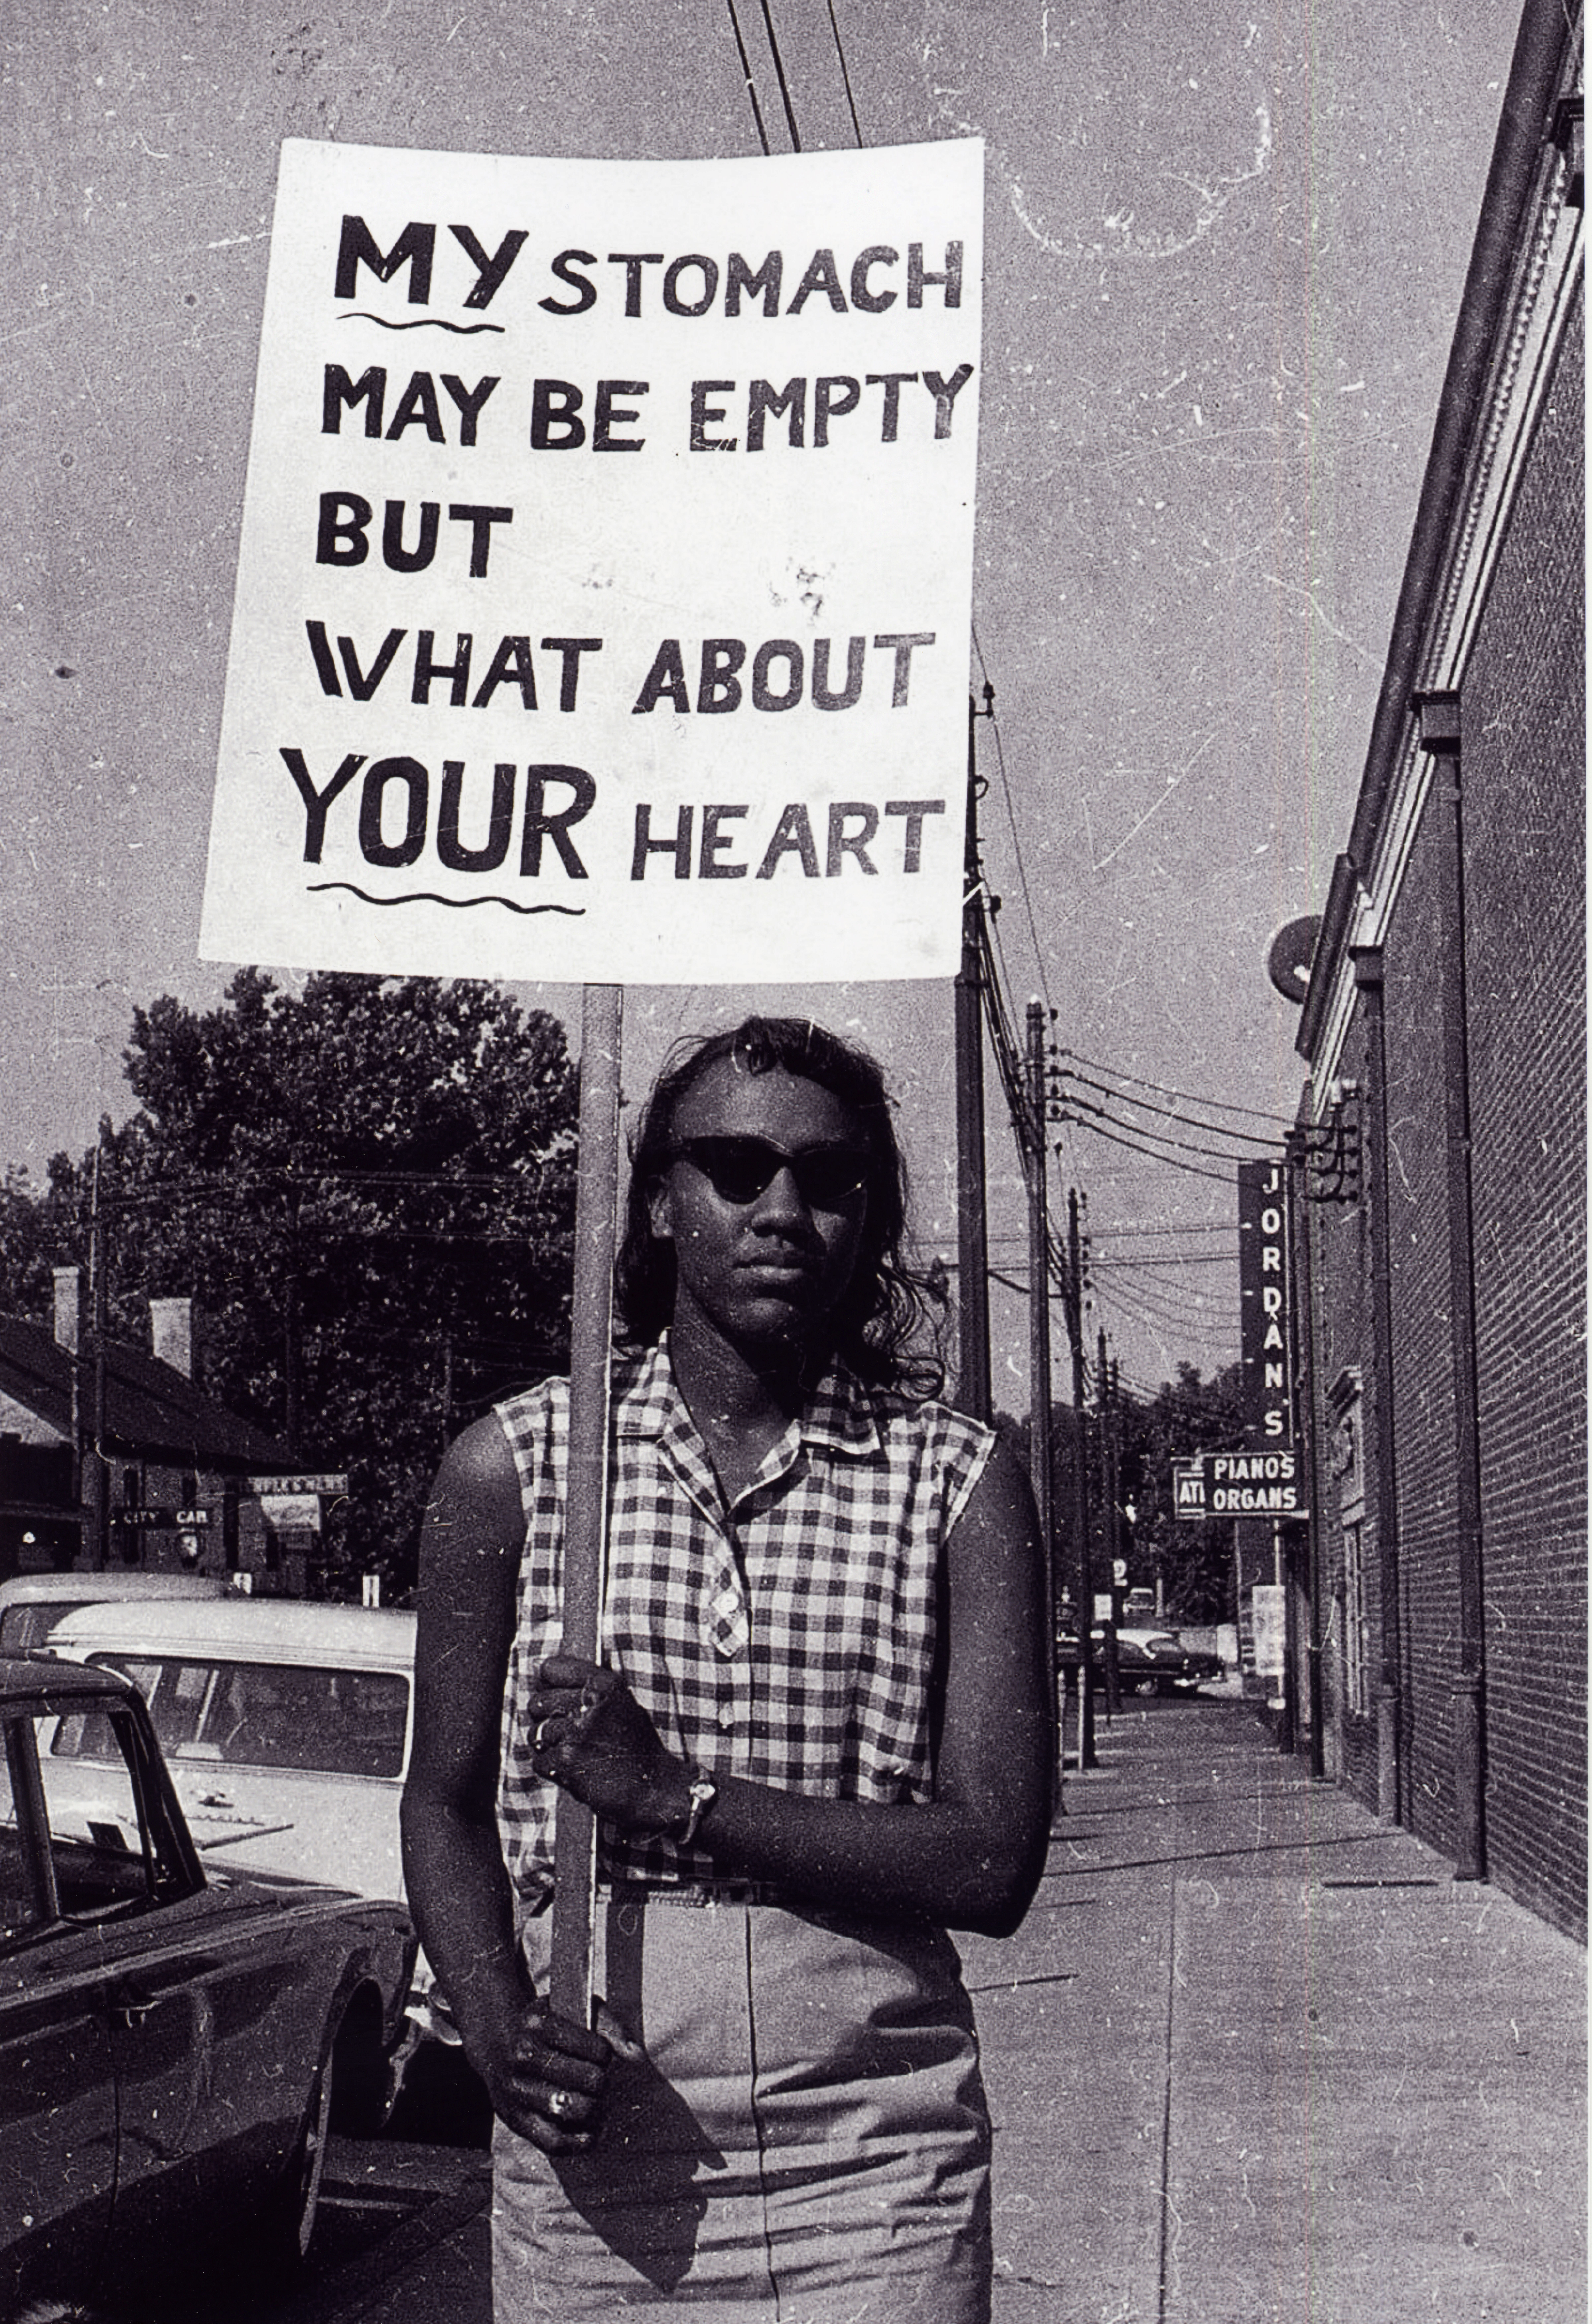 Black and white photo of a Black woman holding a sign that says "My stomach may be empty but what about your heart"